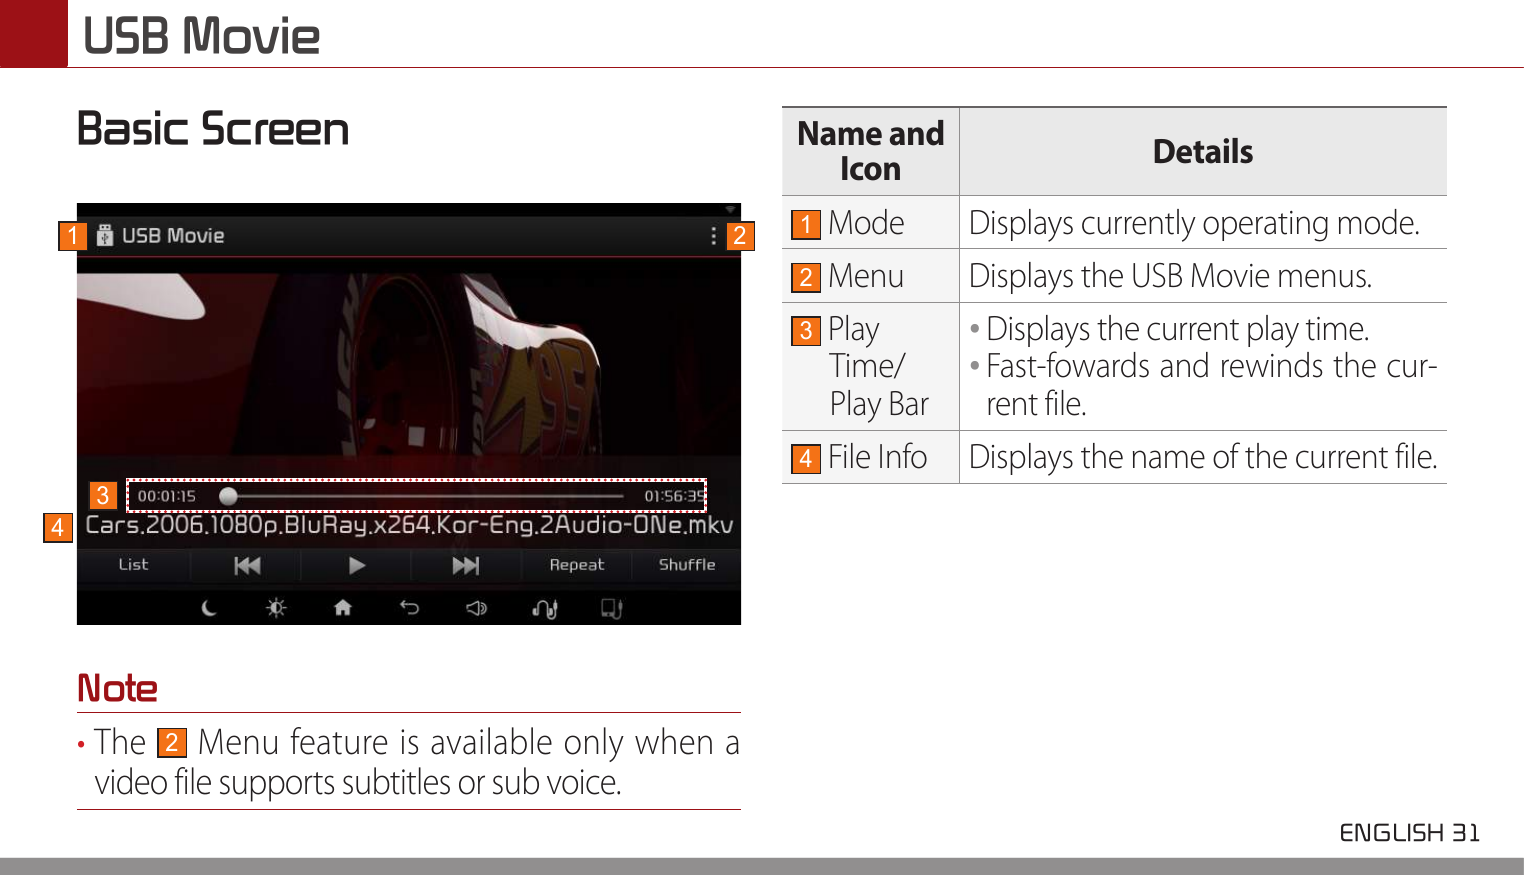  ENGLISH 31 USB MovieBasic ScreenNote• The 2 Menu feature is available only when a video file supports subtitles or sub voice.Name and Icon Details1 Mode Displays currently operating mode.2 Menu Displays the USB Movie menus.3 Play Time/Play Bar••Displays the current play time.••Fast-fowards and rewinds the cur-rent file.4 File Info Displays the name of the current file.1 234